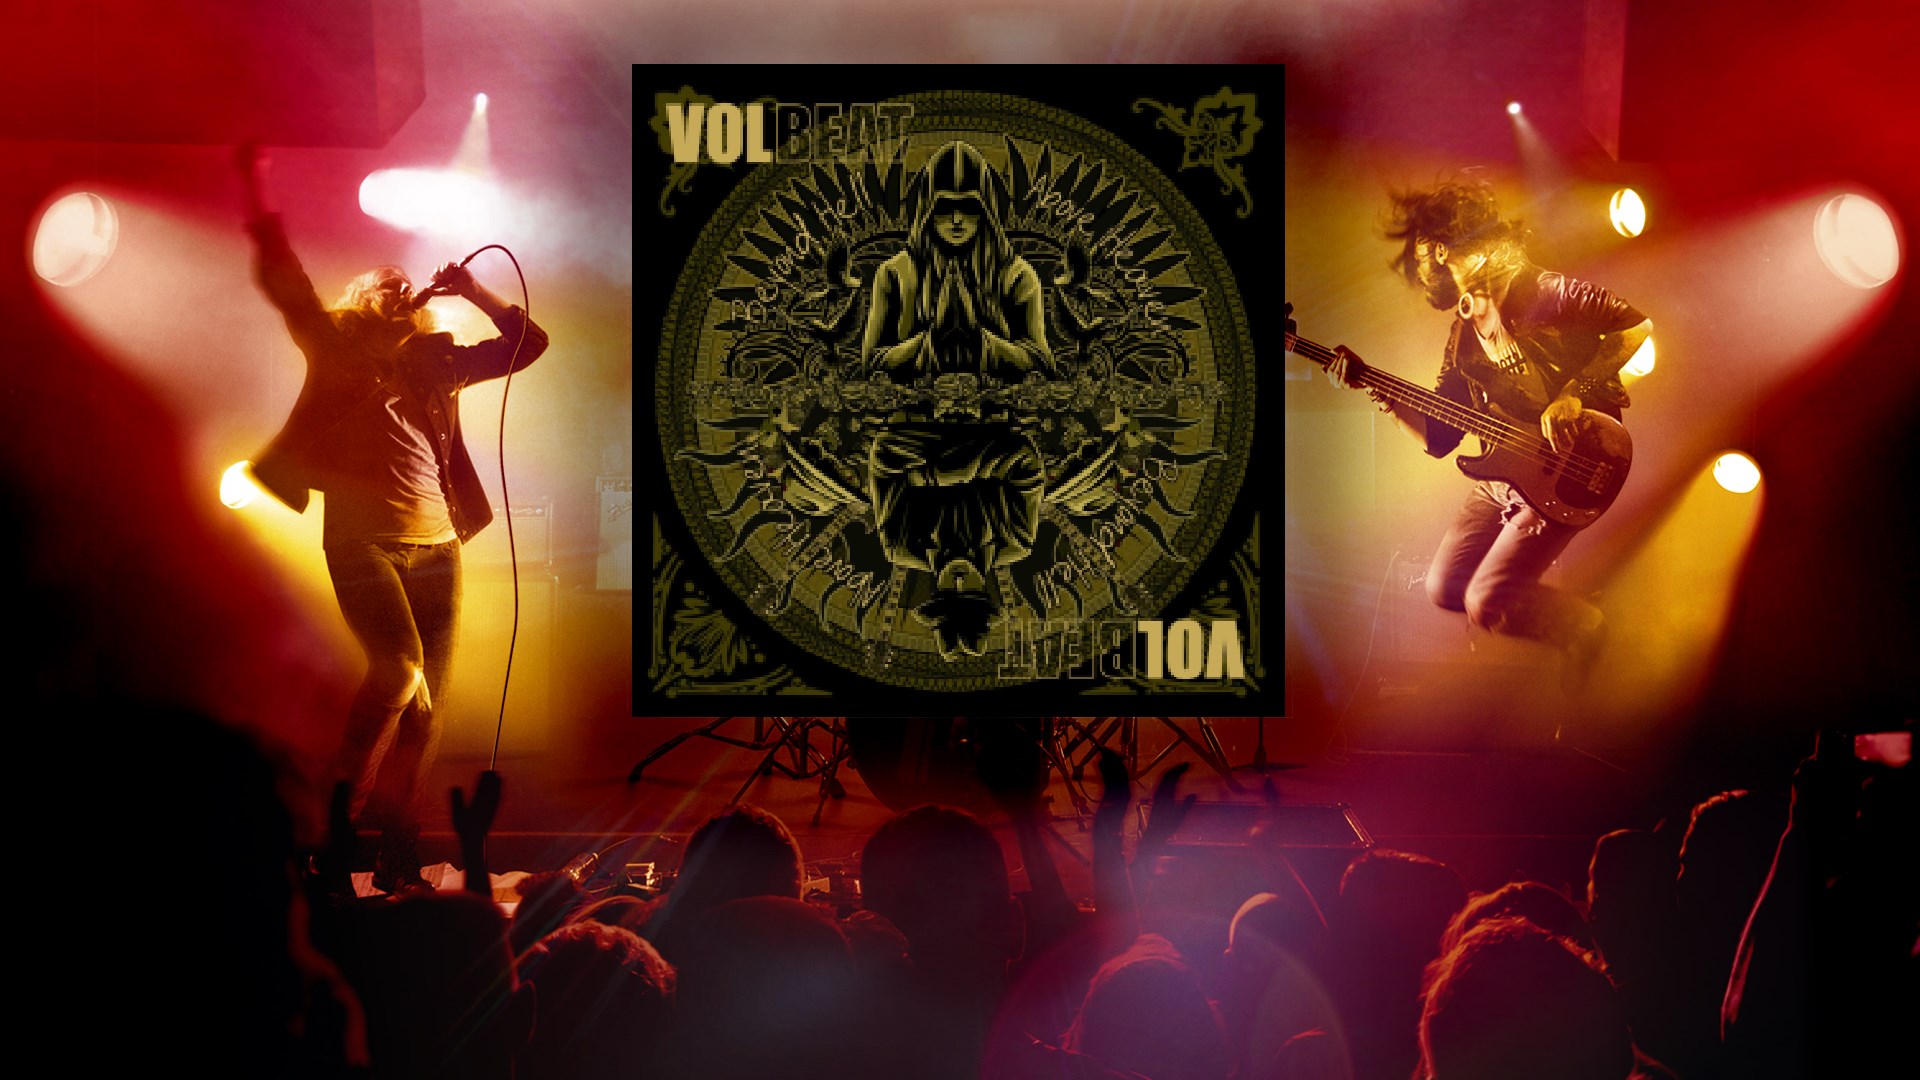 Volbeat Hd Wallpapers